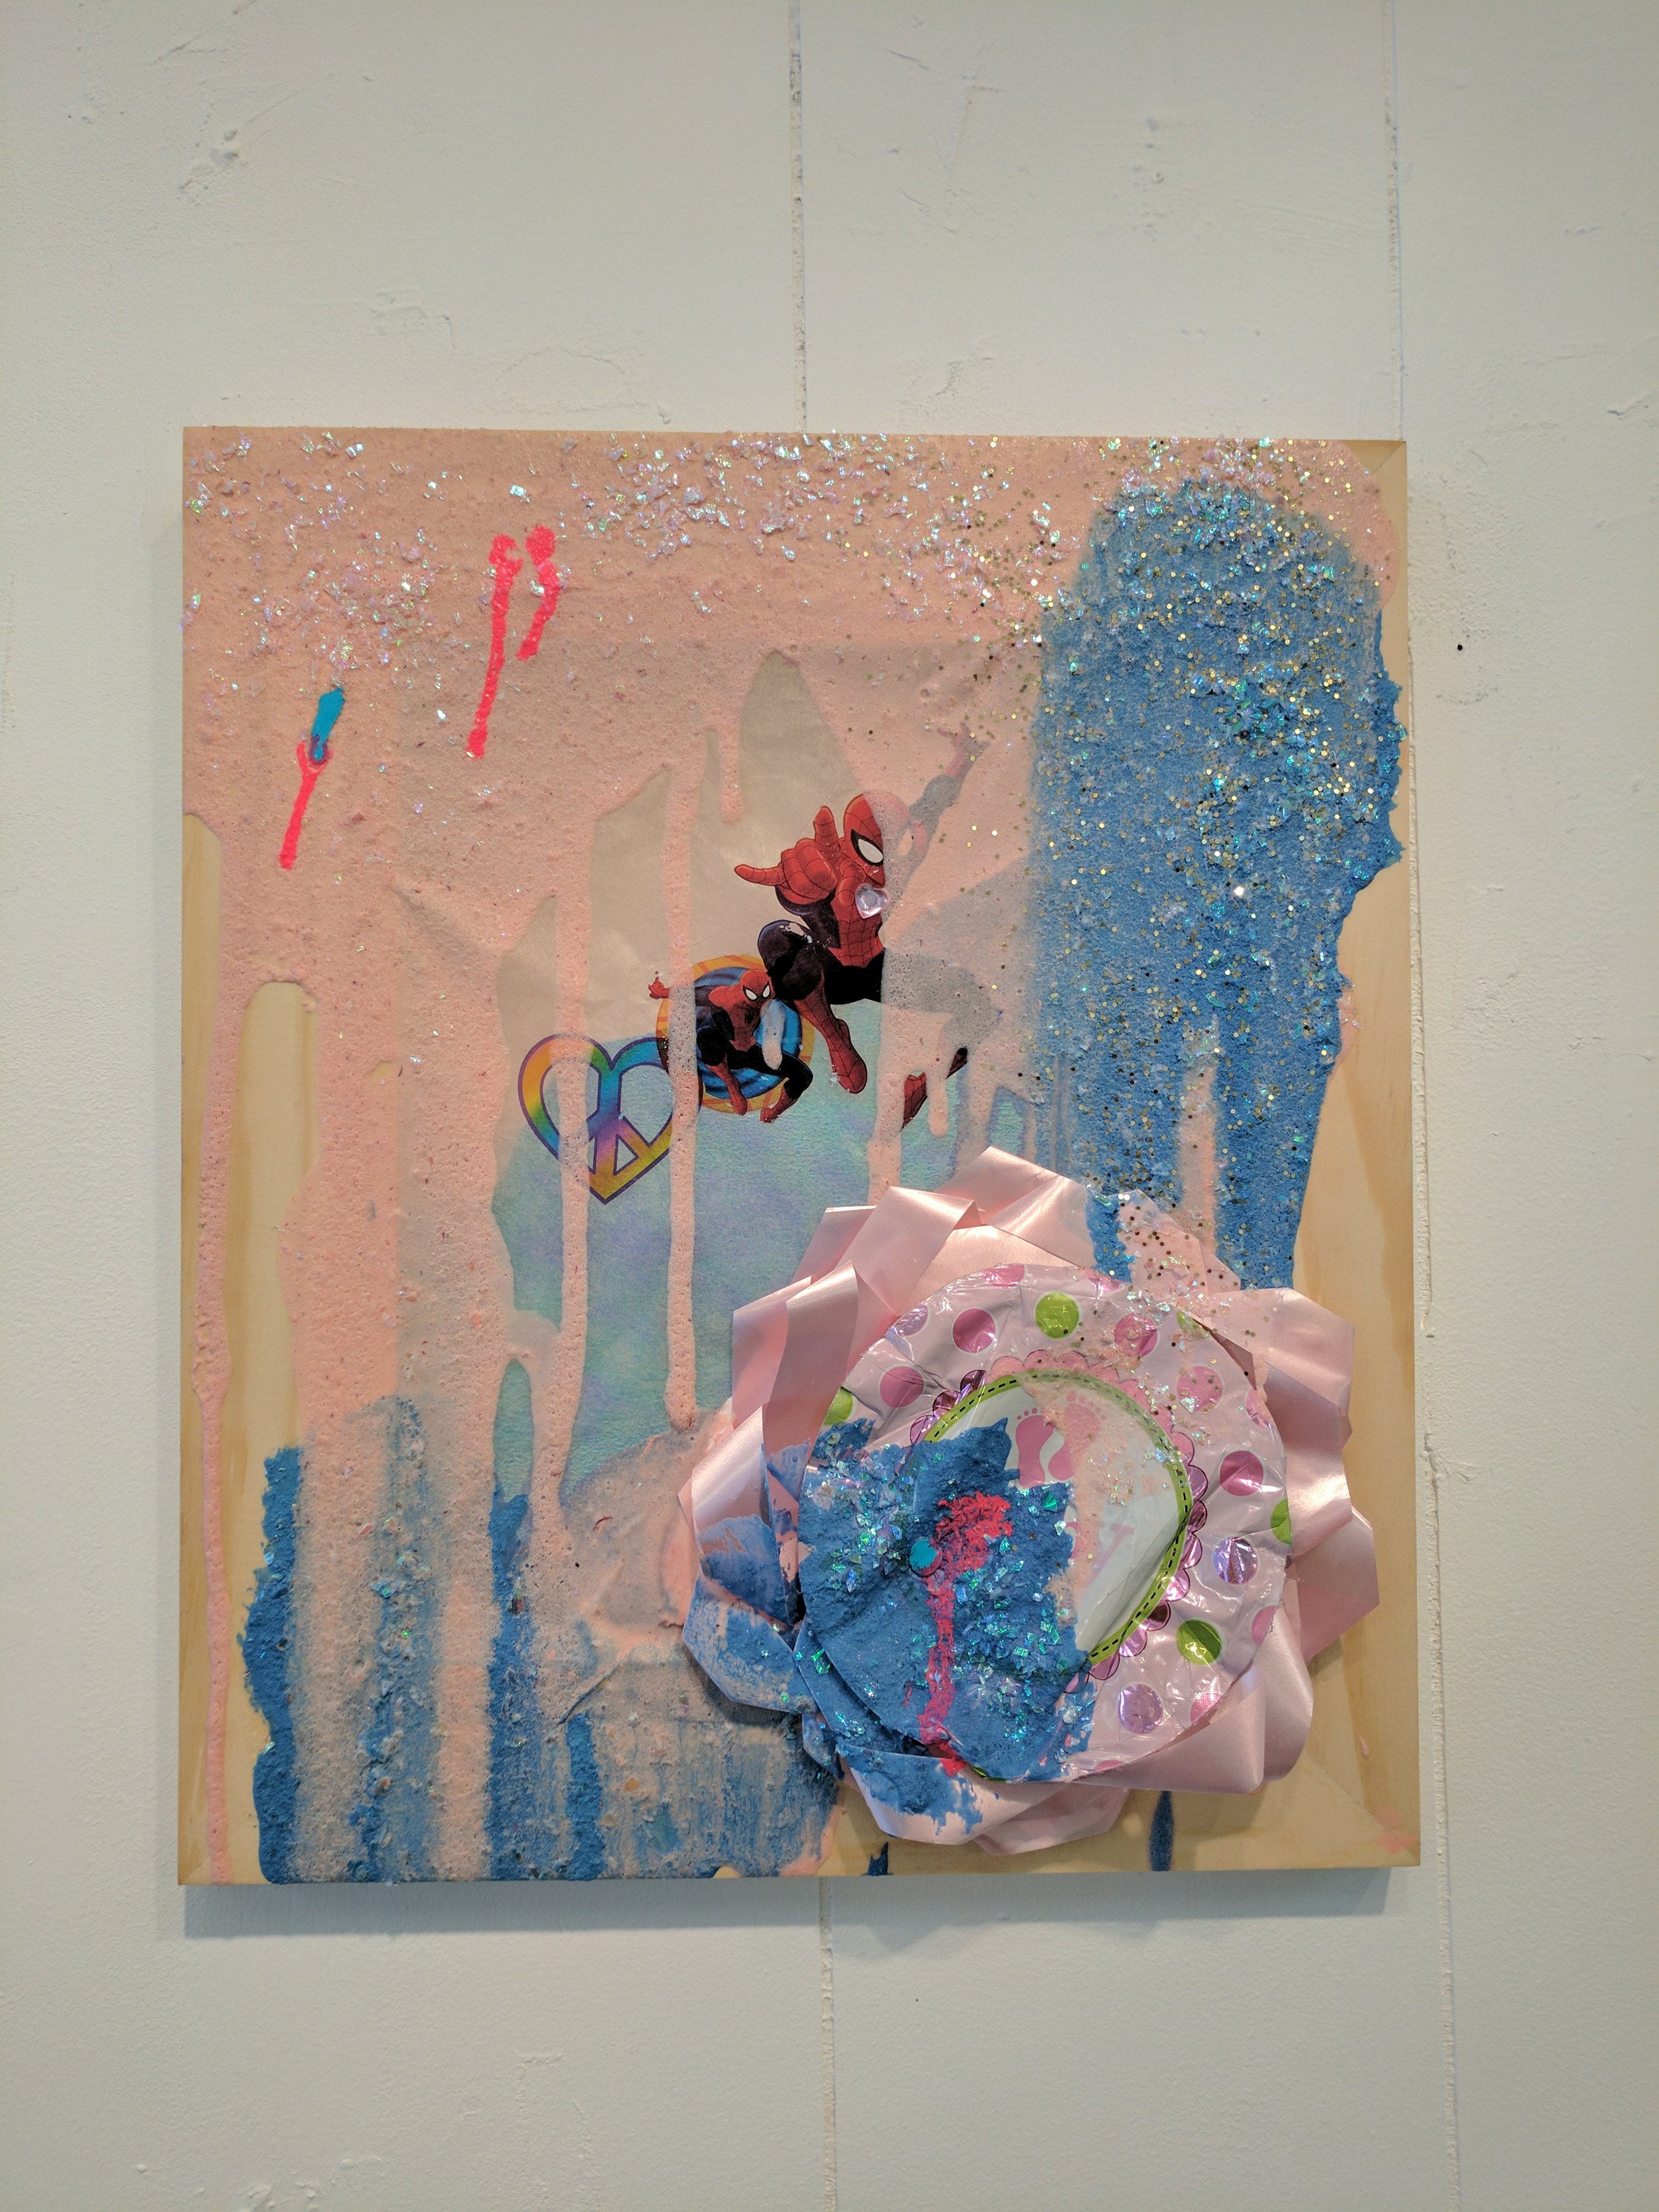   It's a Party 7   Balloon, acrylic, sugar past, glitter, confetti, temporary tattoos, and paper on wood  2017  From "Cry if I want 2" a collaborative show with Jessica Bingham  Her website: http://www.jessicabinghamart.com/ 